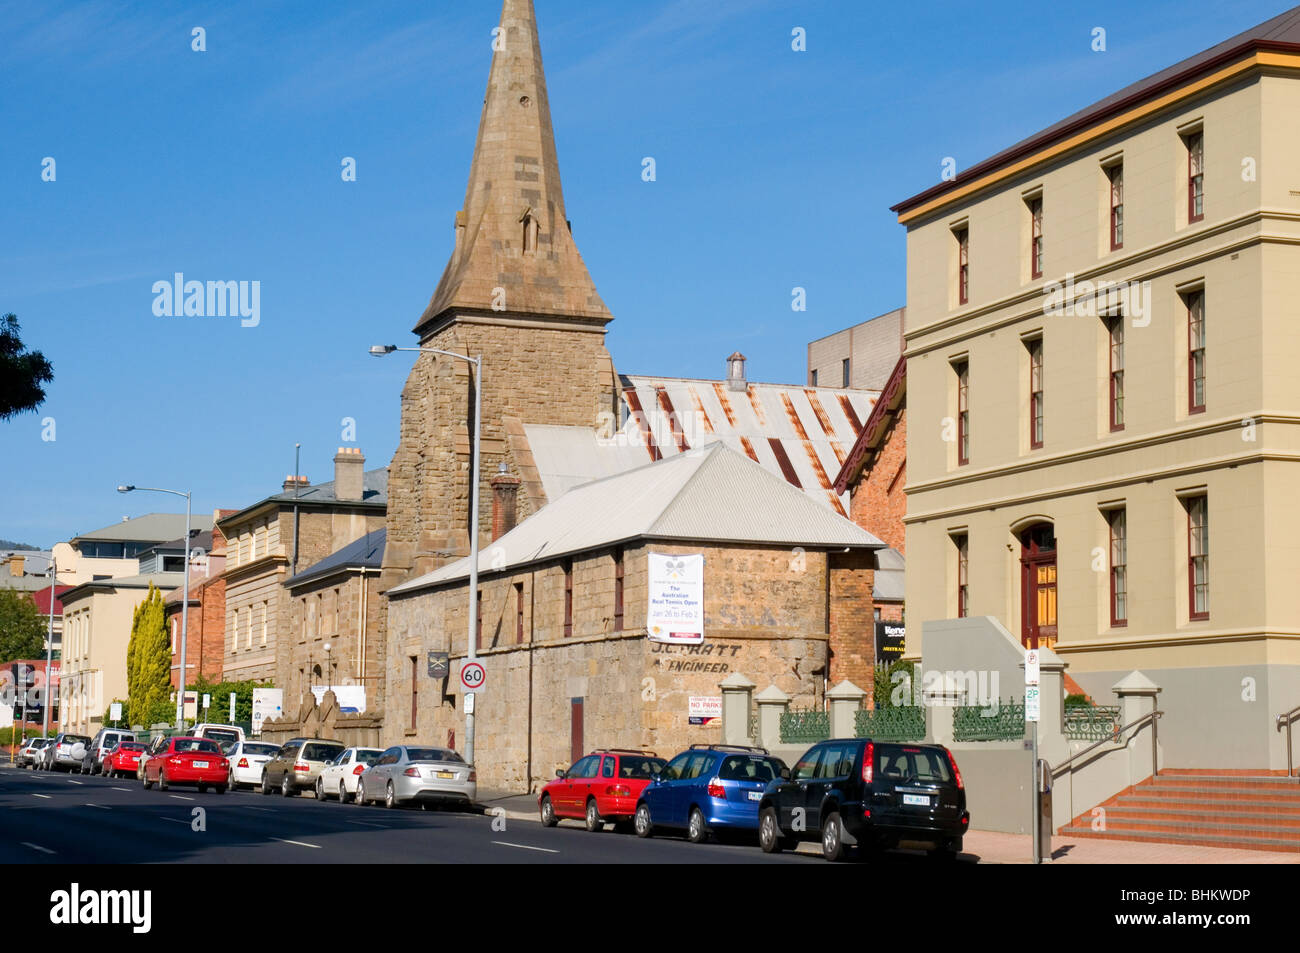 Davey Street with the 1875 Real Tennis Club building in foreground, Hobart, Tasmania Stock Photo